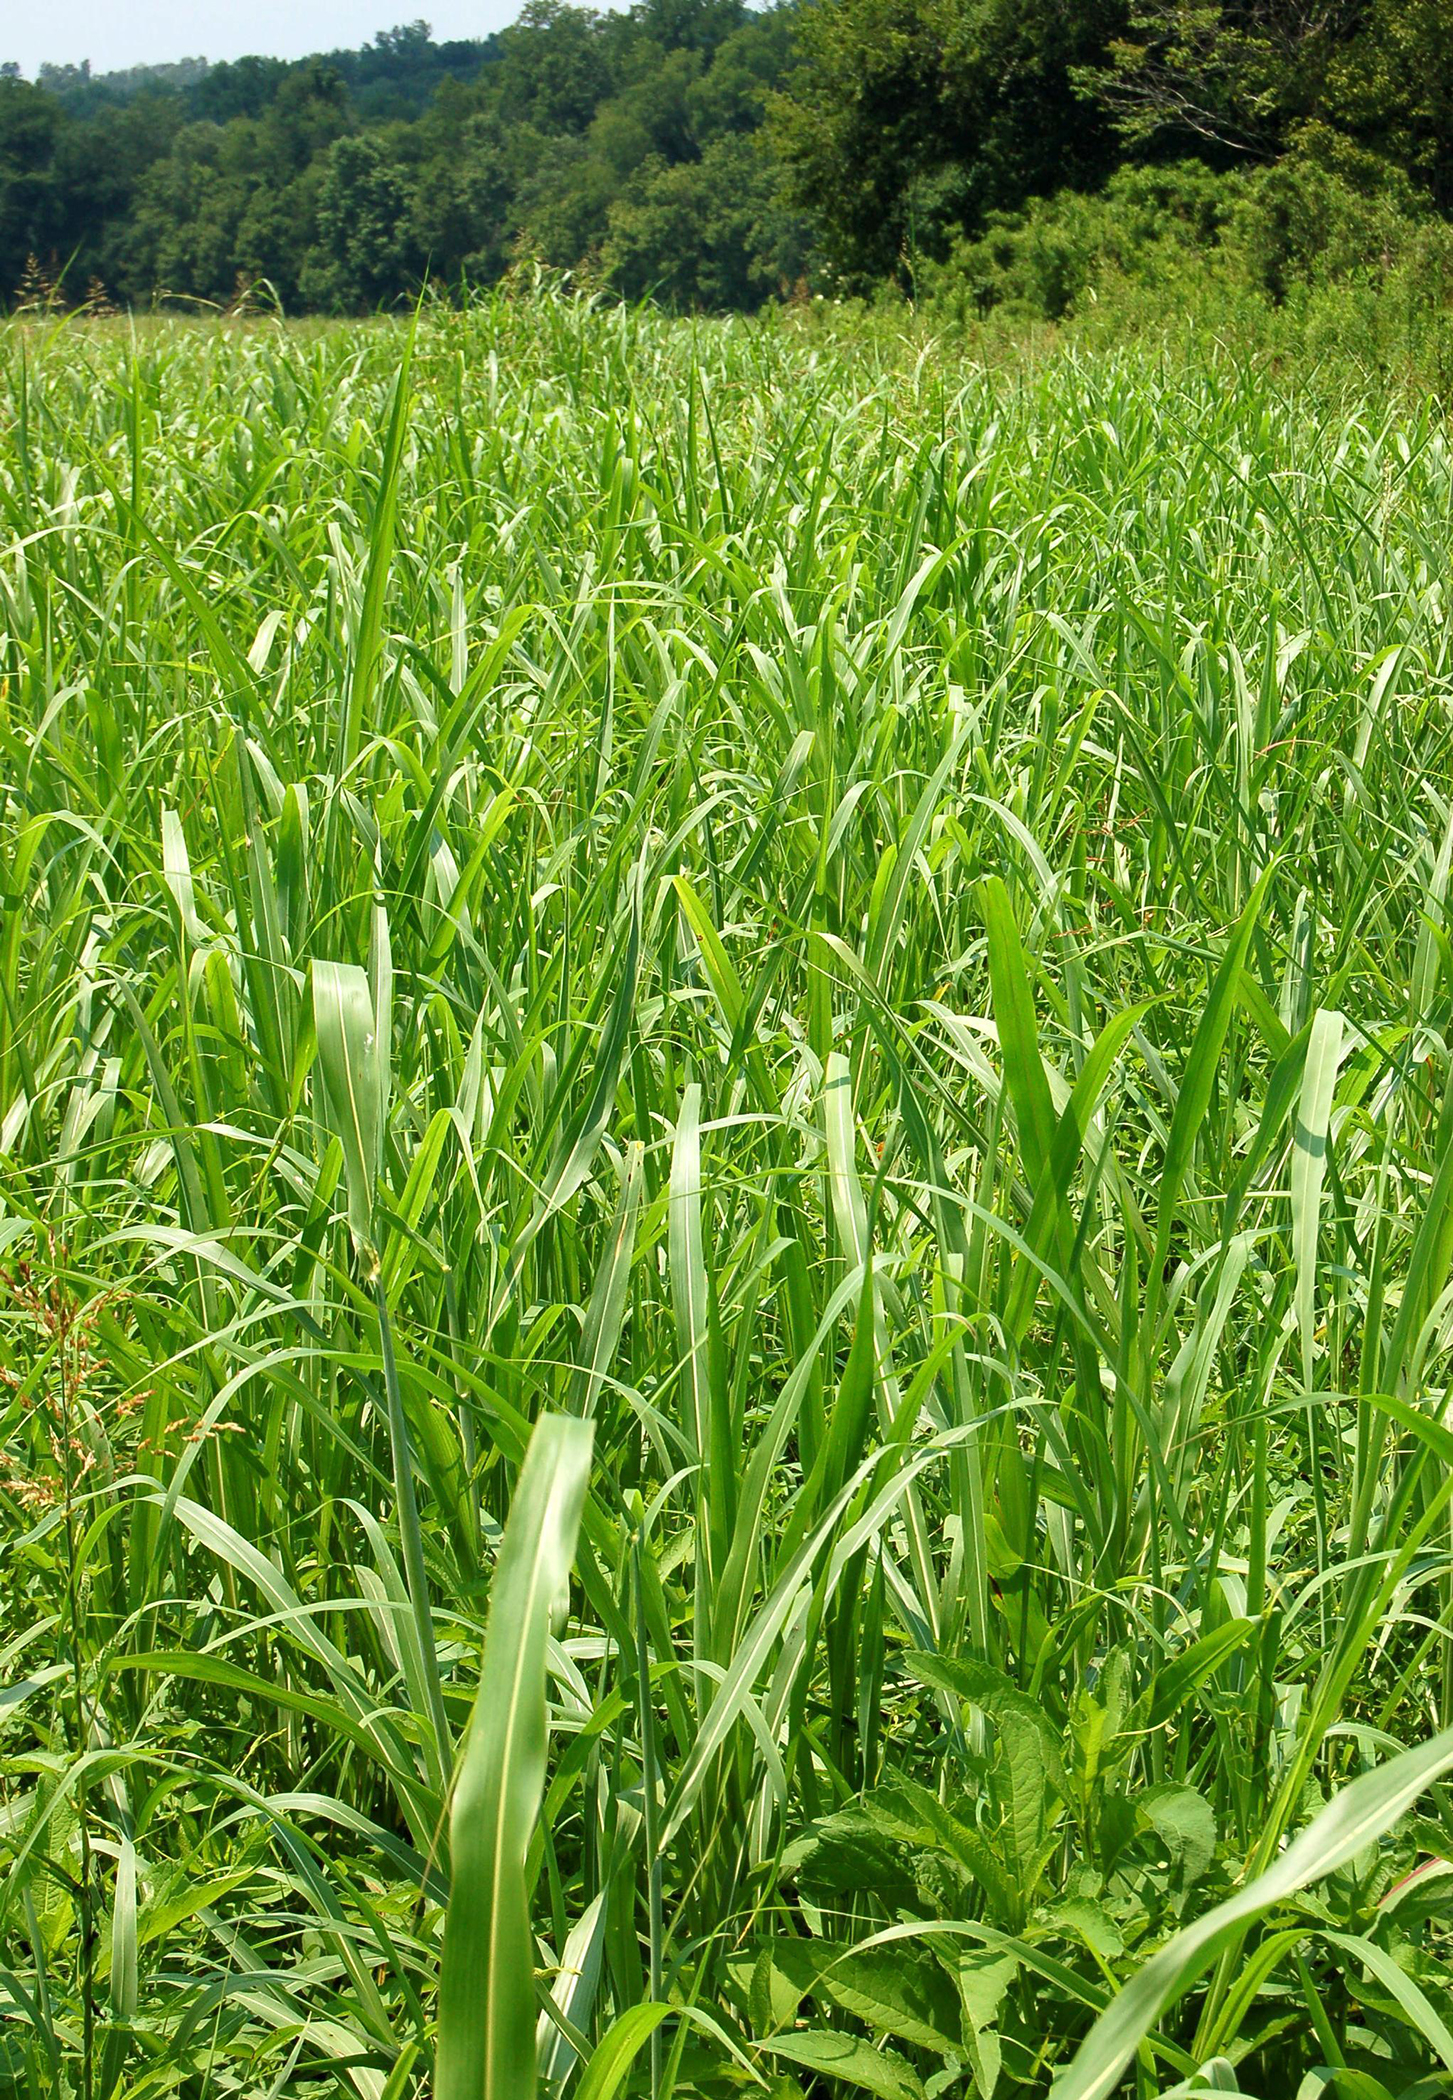 Johnsongrass, known scientifically as Sorghum halepense, grows happily in a field it invaded. The weed continues to cause millions of dollars in lost agricultural revenue each year.